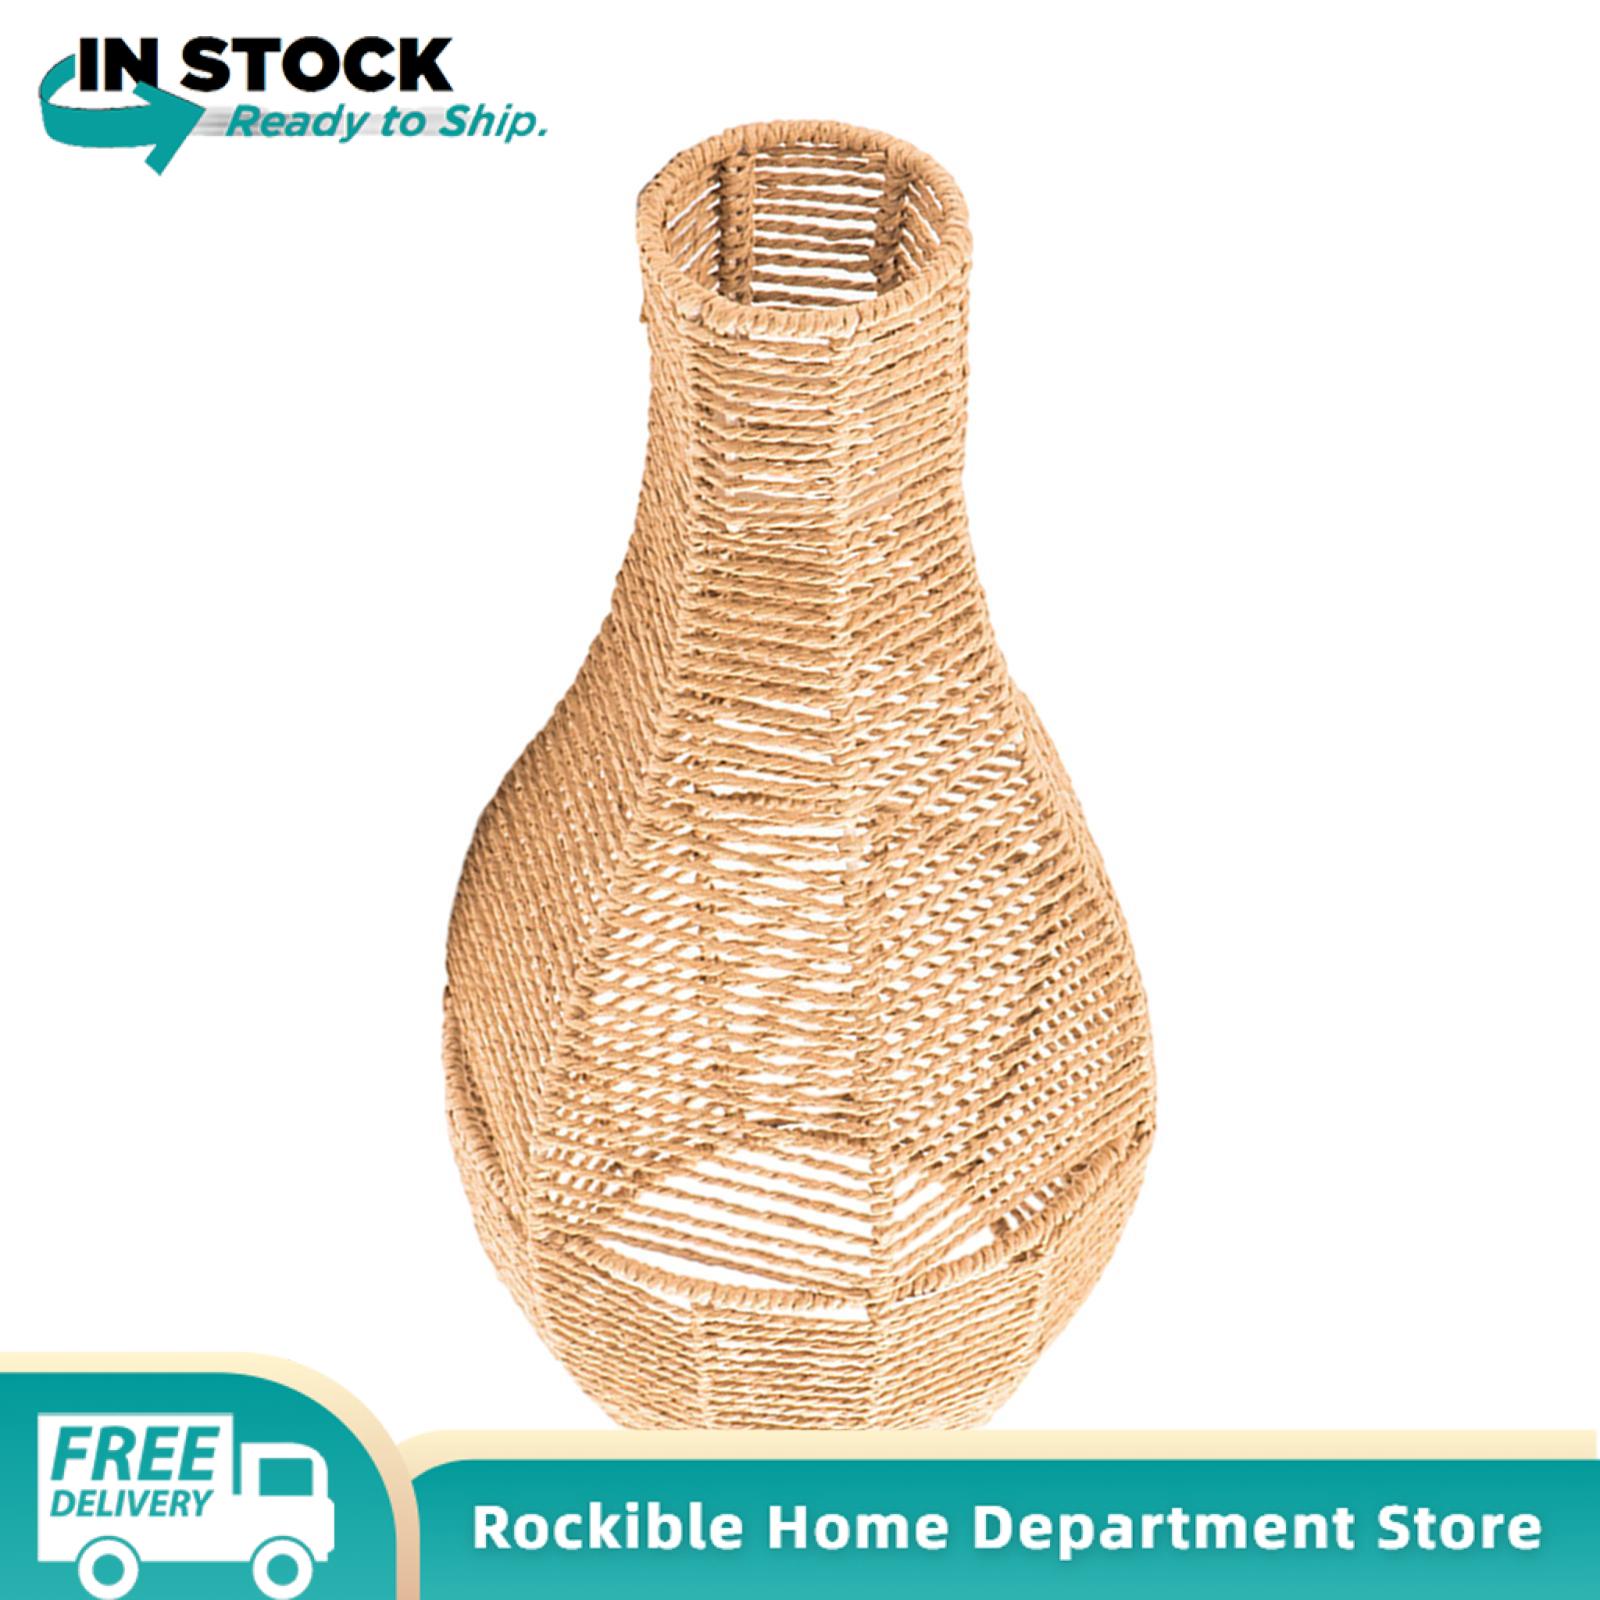 rockible Paper Rope Lampshade Handwoven Lamp Shade Pendant Light Cover